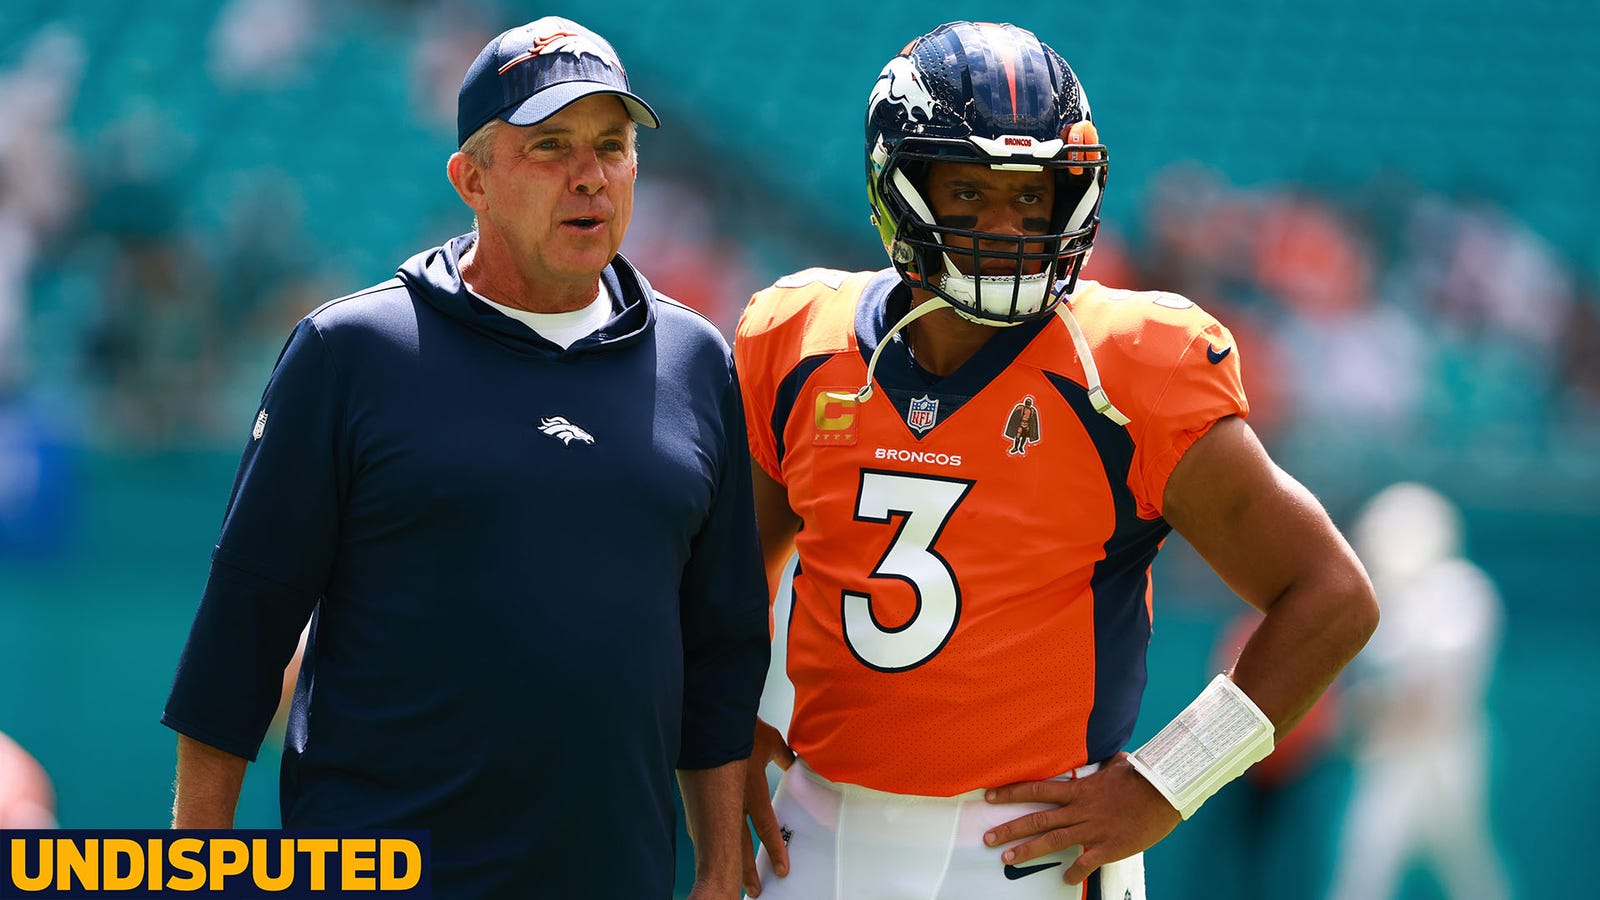 Broncos' acquisition of Russell Wilson considered one of the worst trades in NFL history